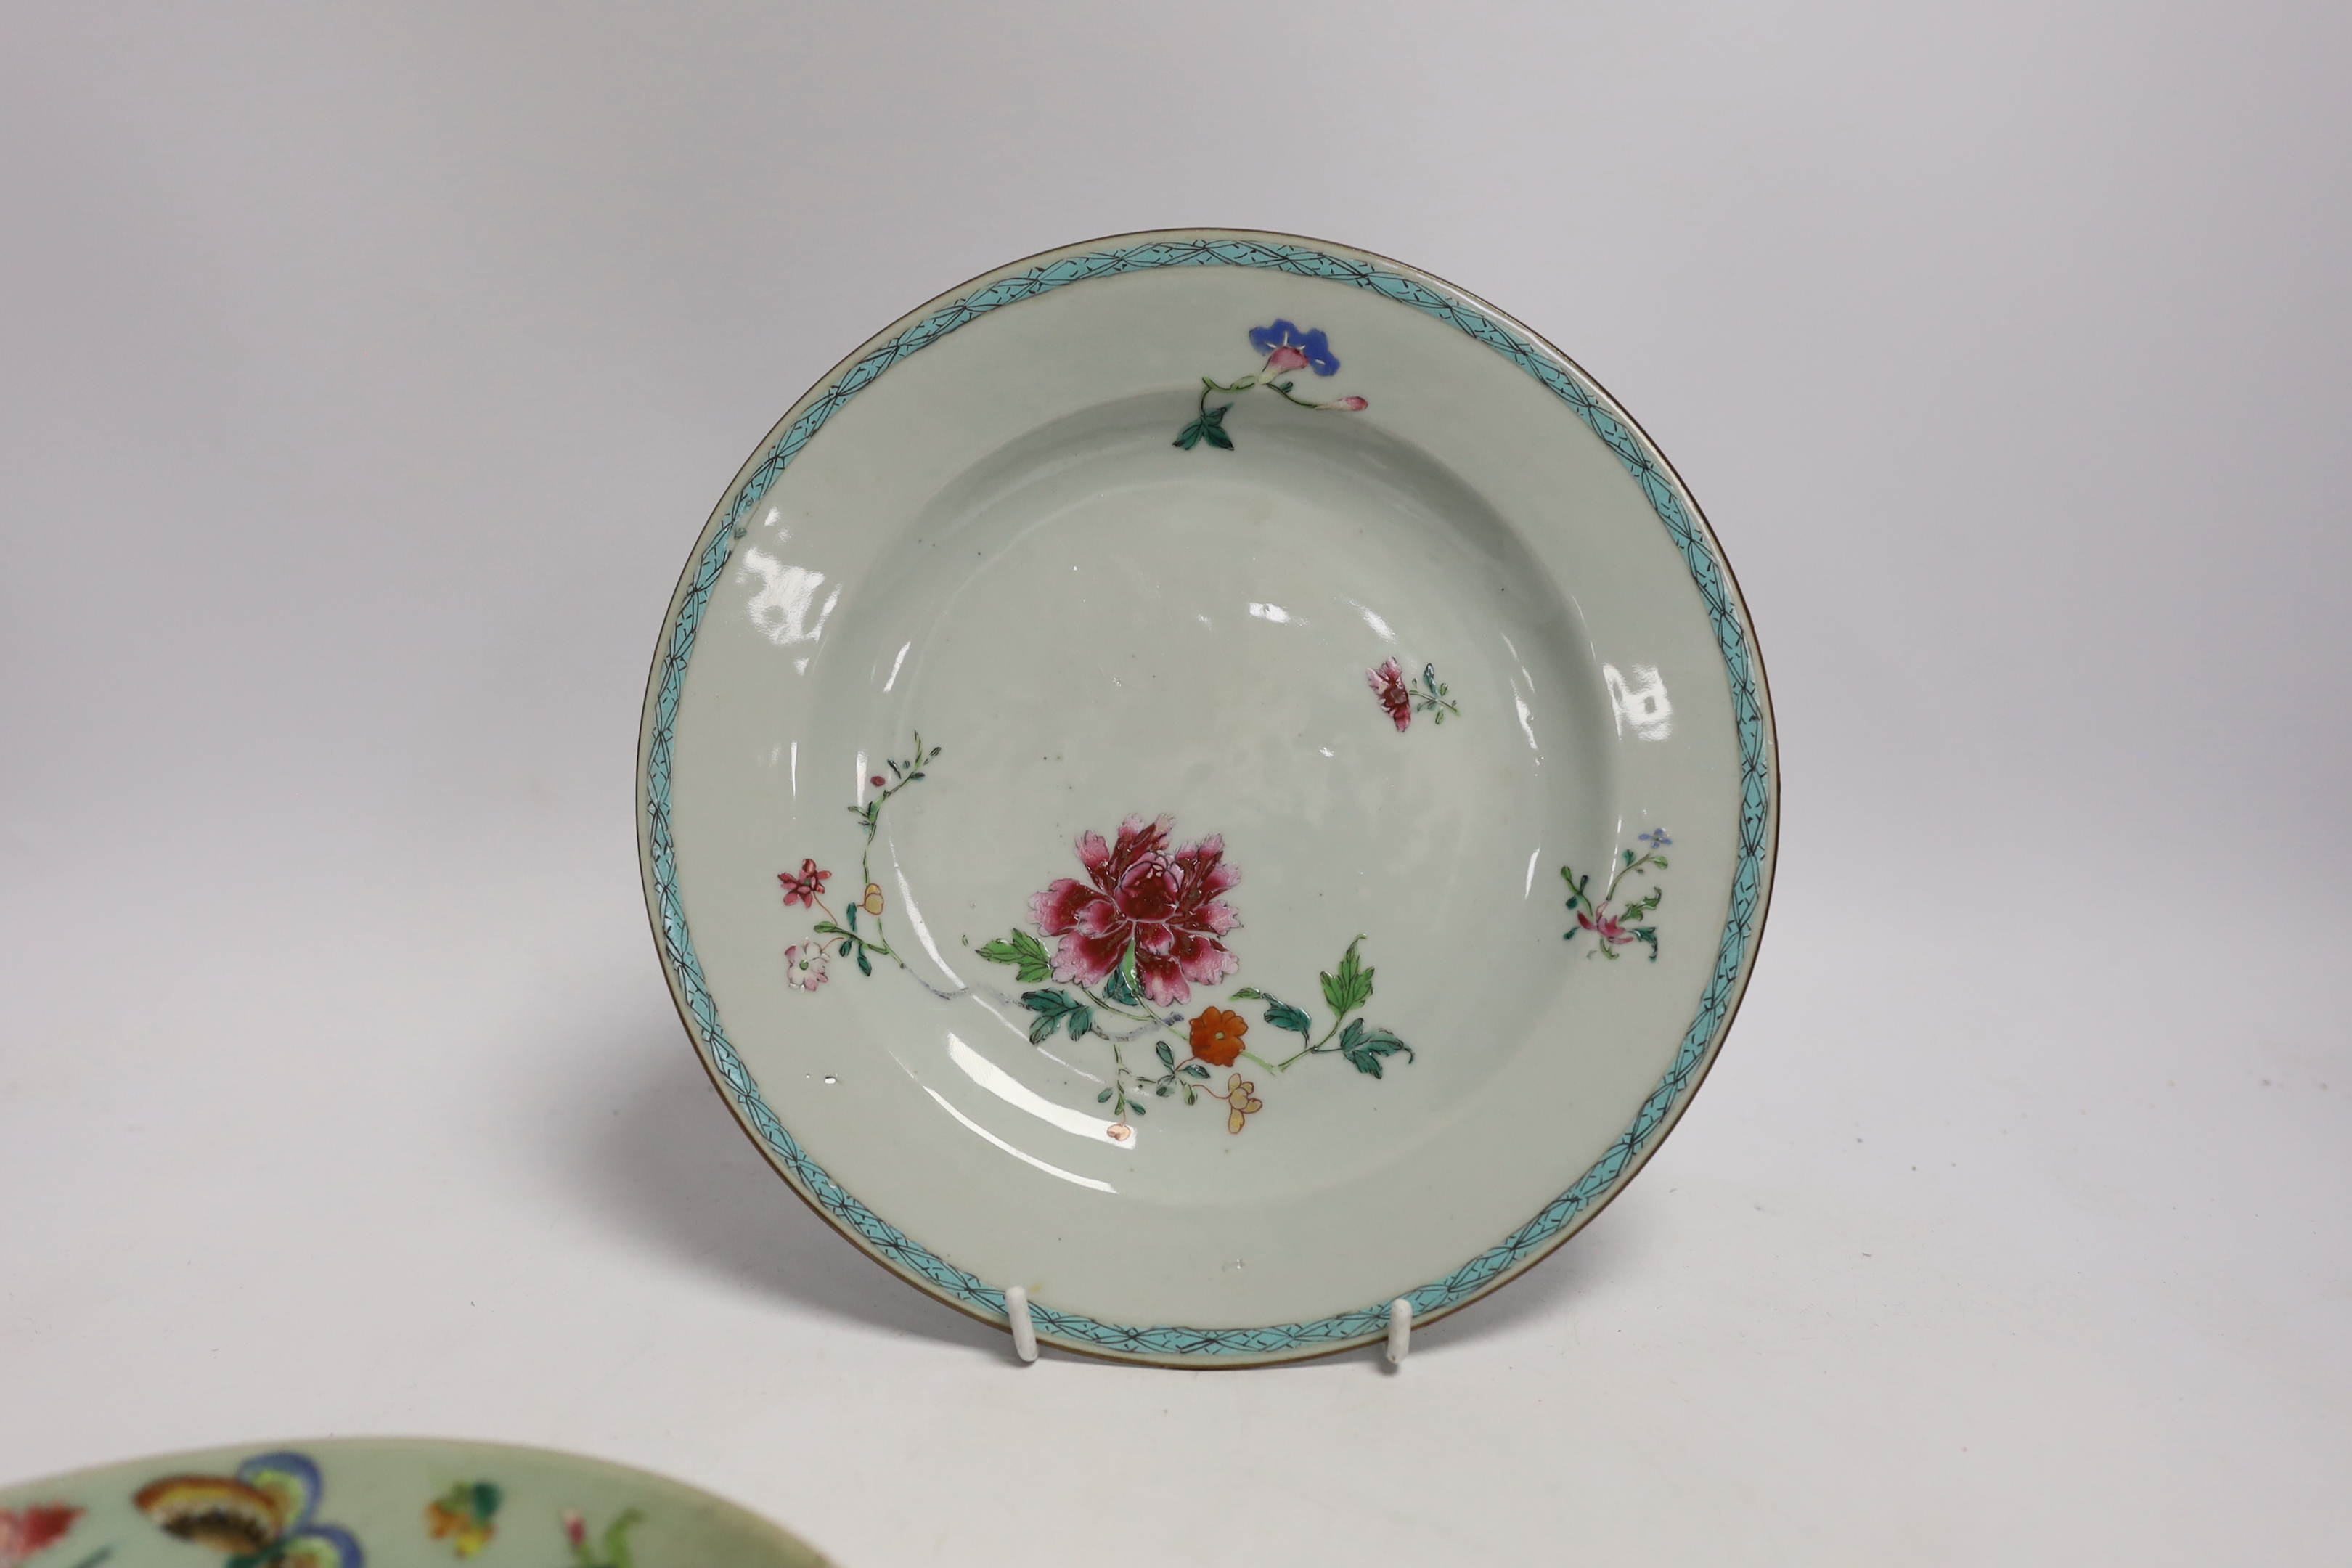 An 18th century Chinese export famille rose plate, 23cm diameter, and two 19th century celadon famille rose plates